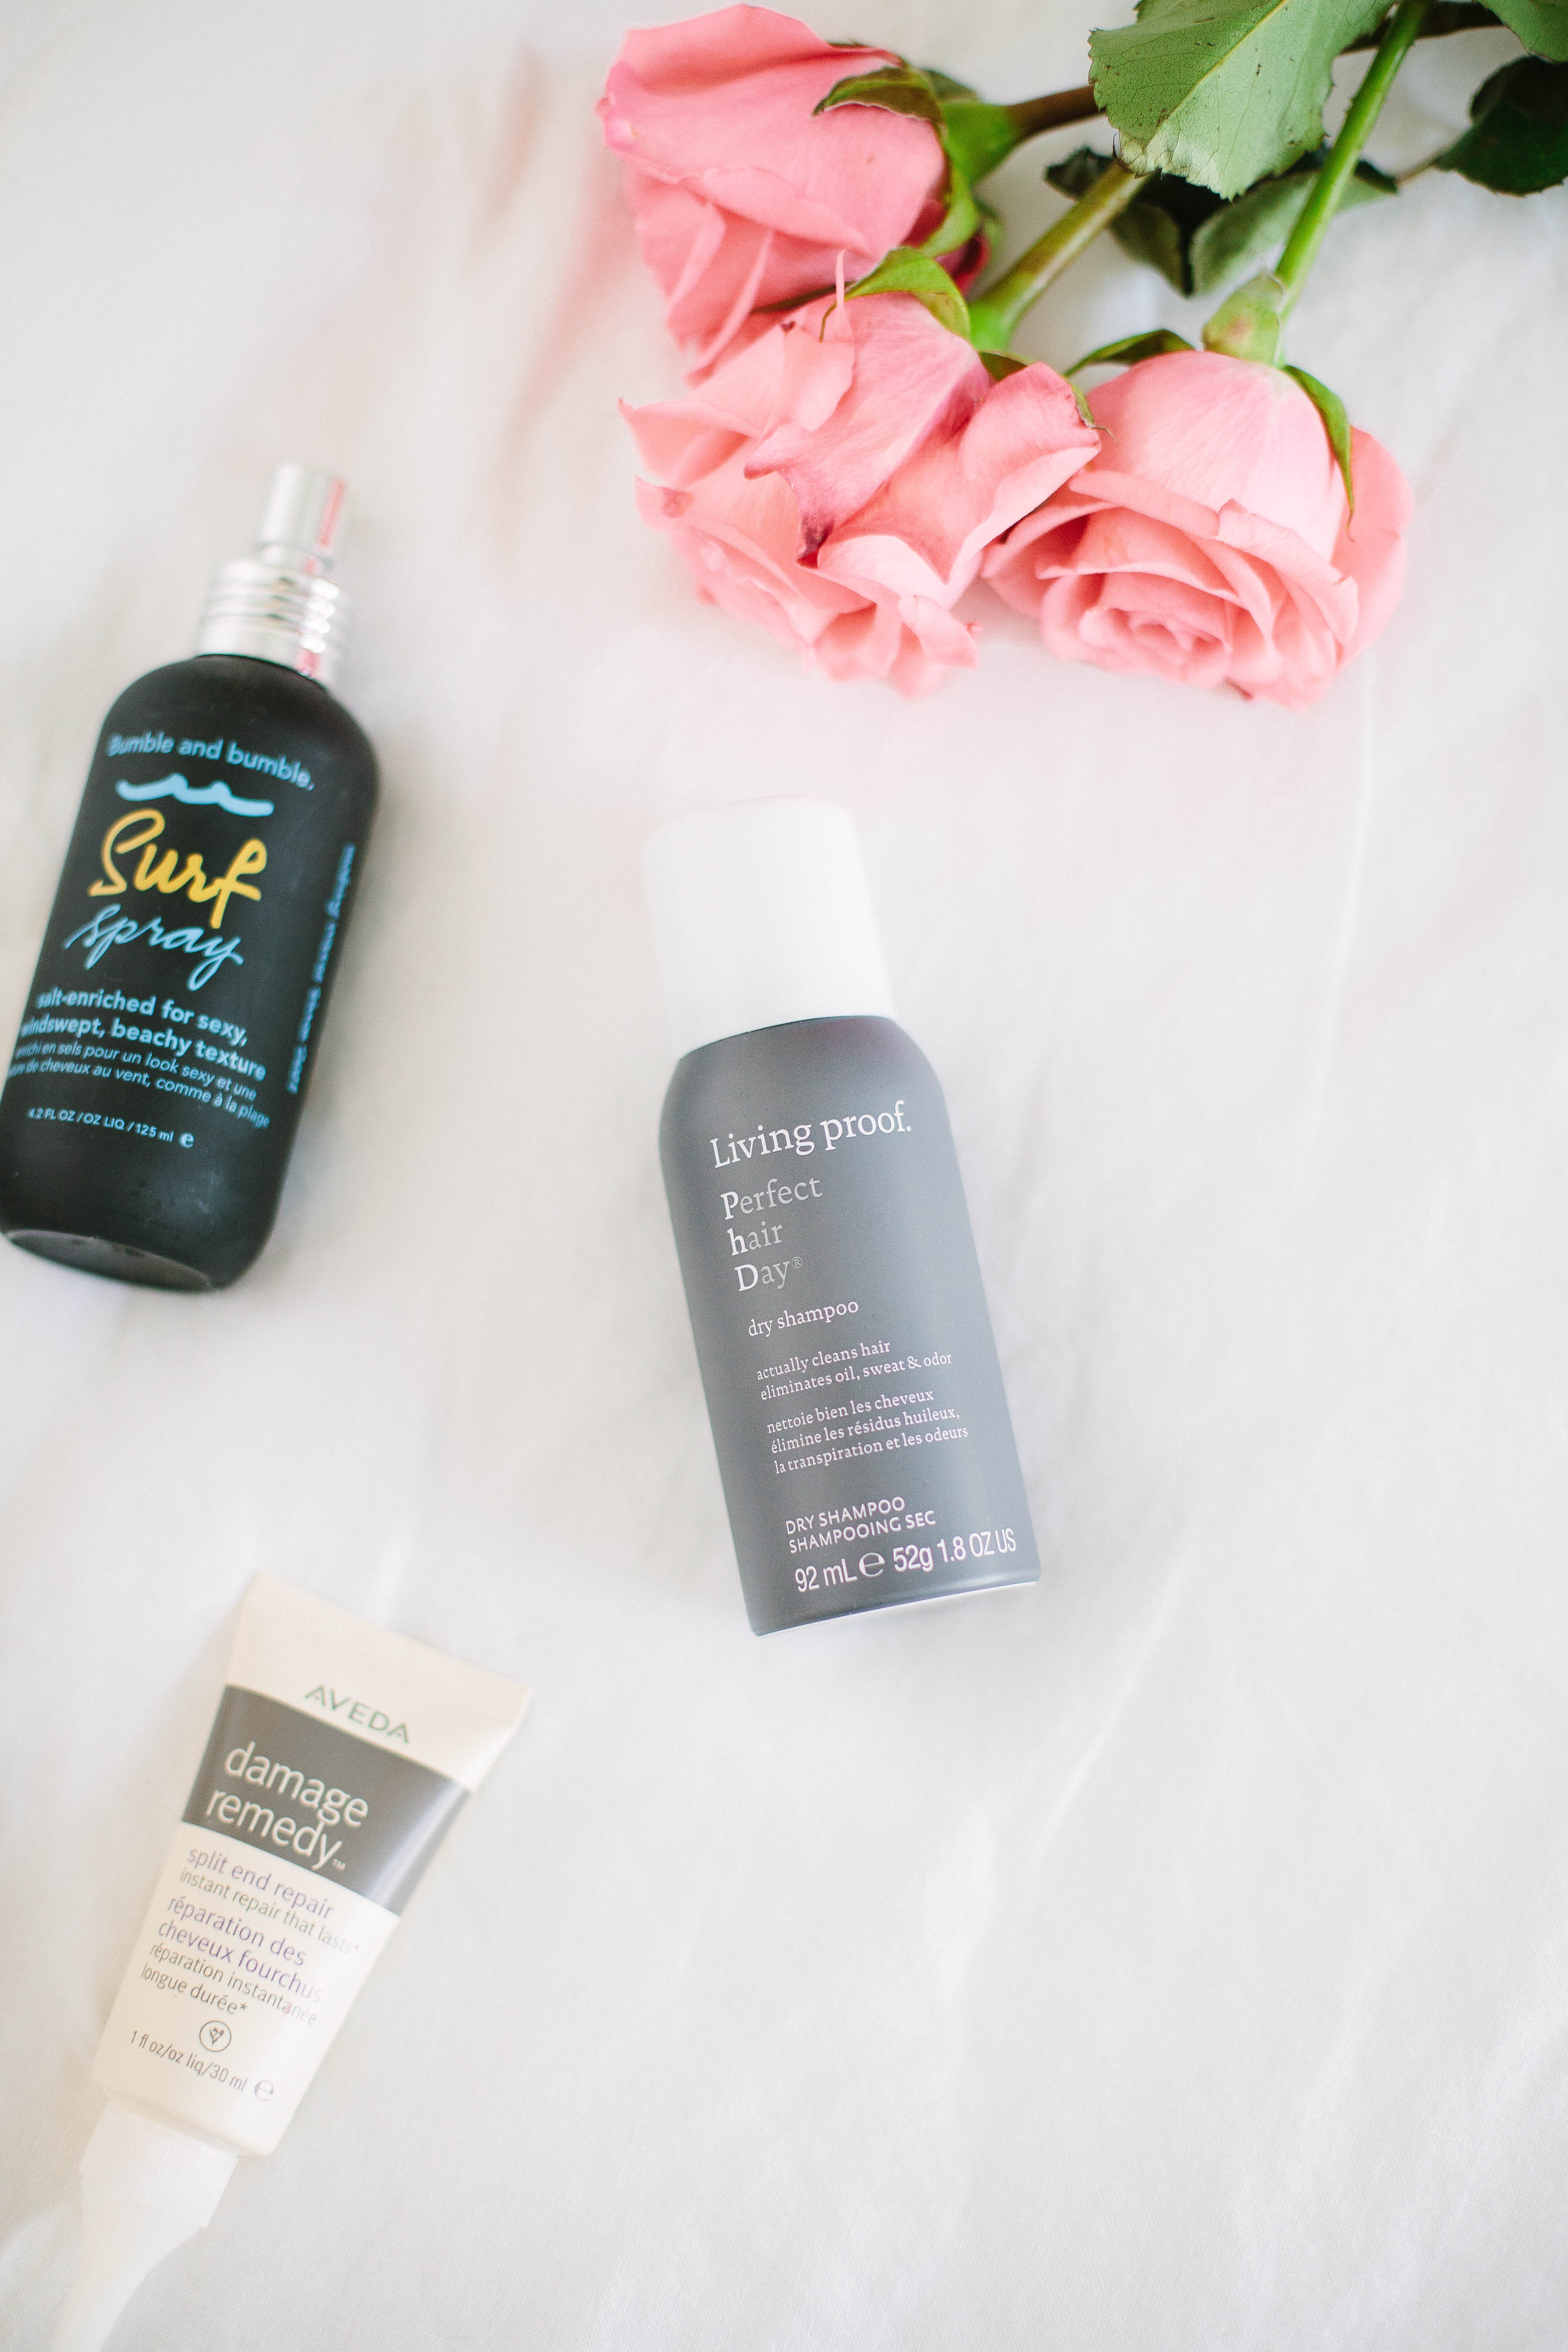 My favorite summer hair products to combat frizz and humidity all summer long.